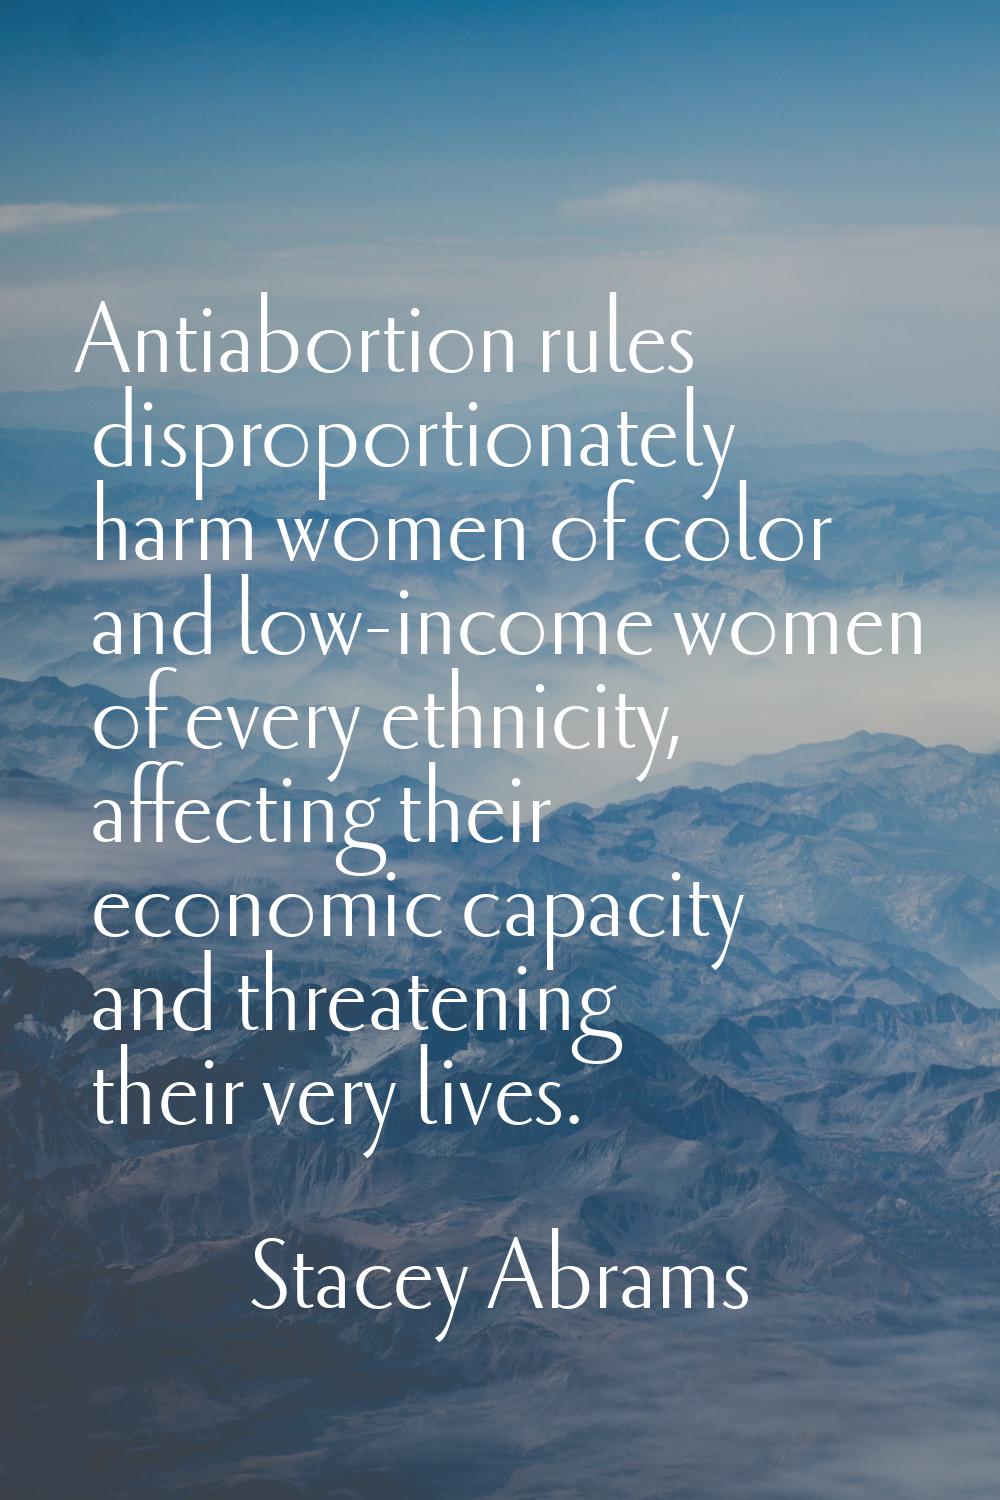 Antiabortion rules disproportionately harm women of color and low-income women of every ethnicity, 